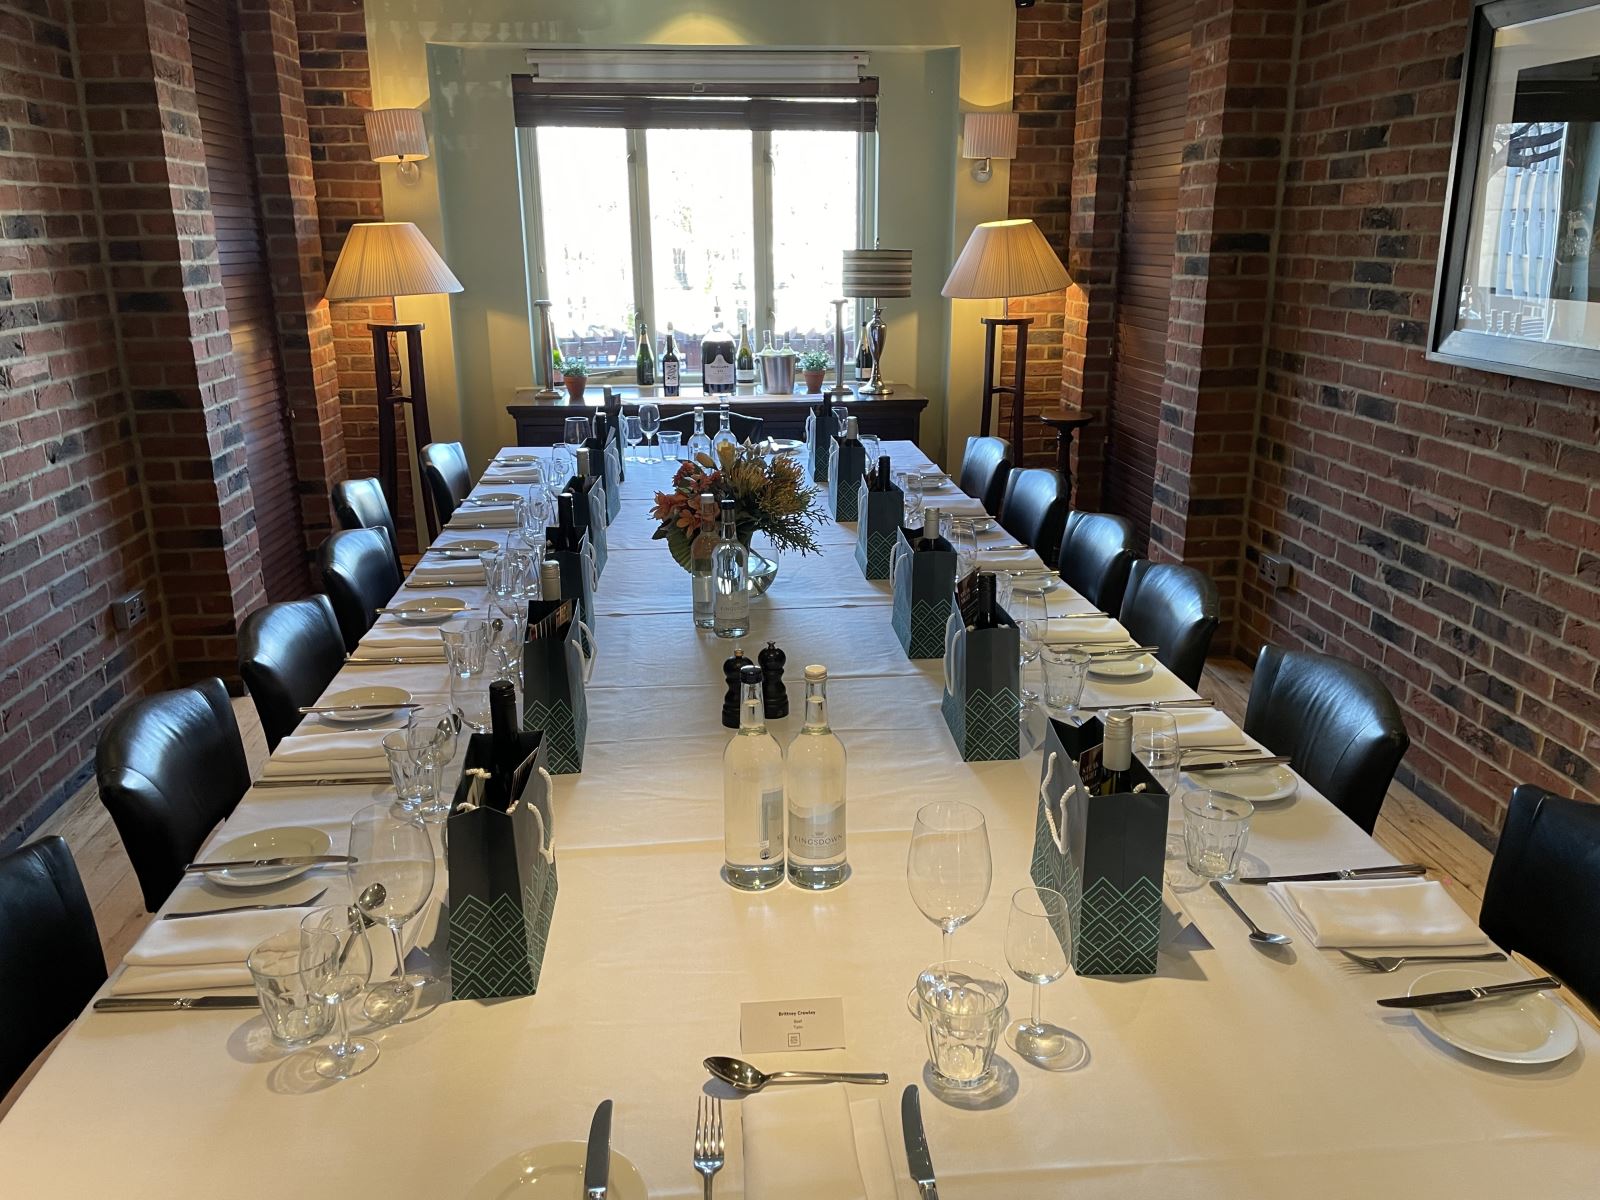 Almaviva dining room laid for a private lunch